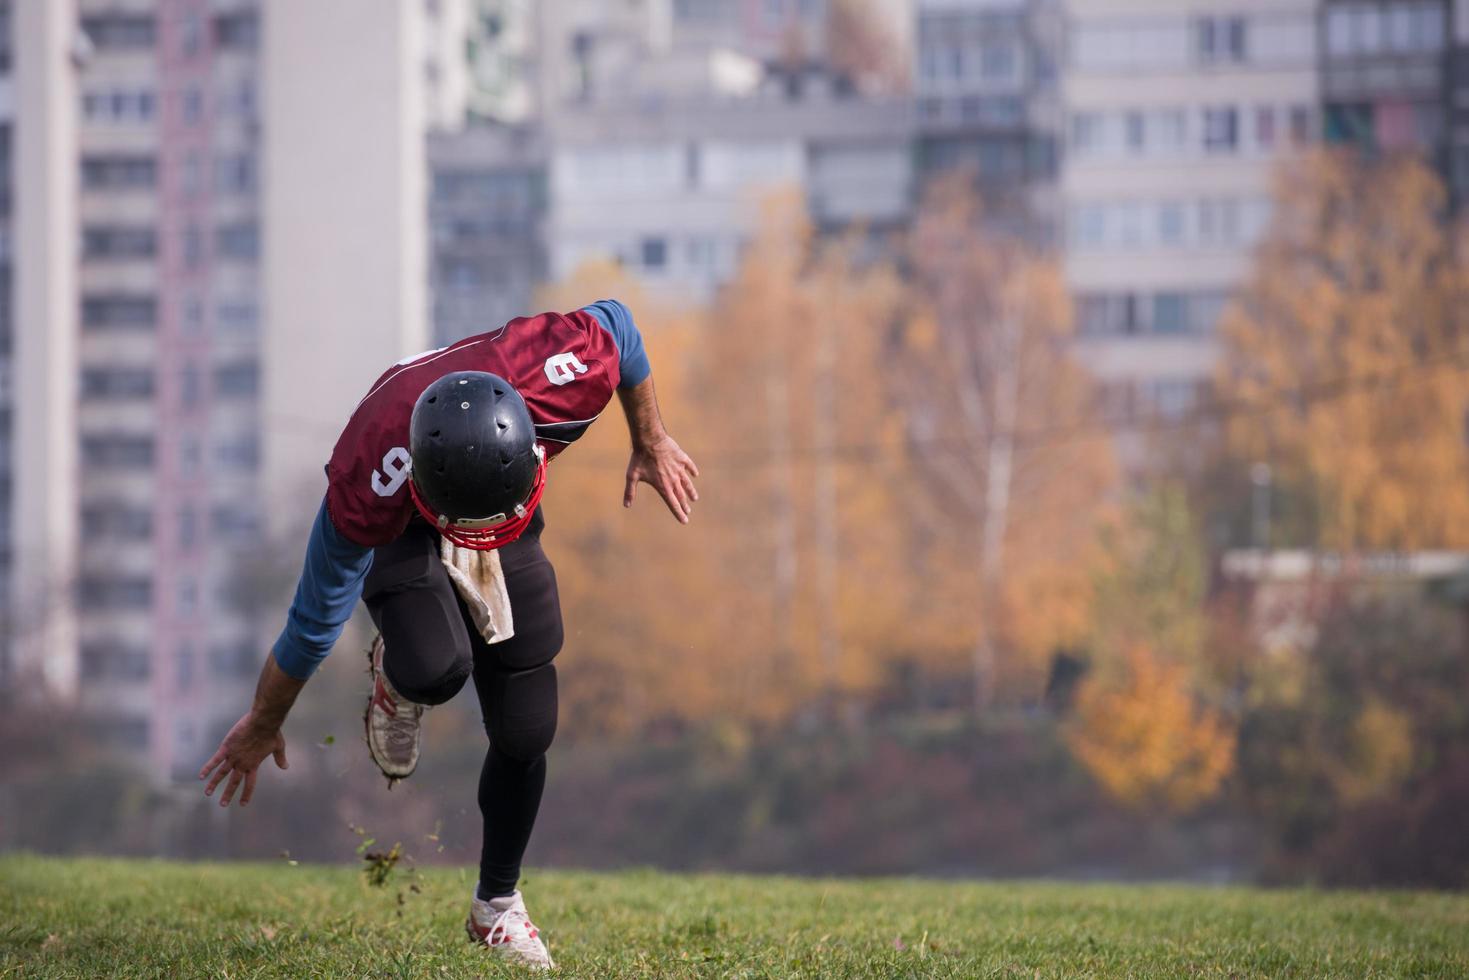 american football player in action photo